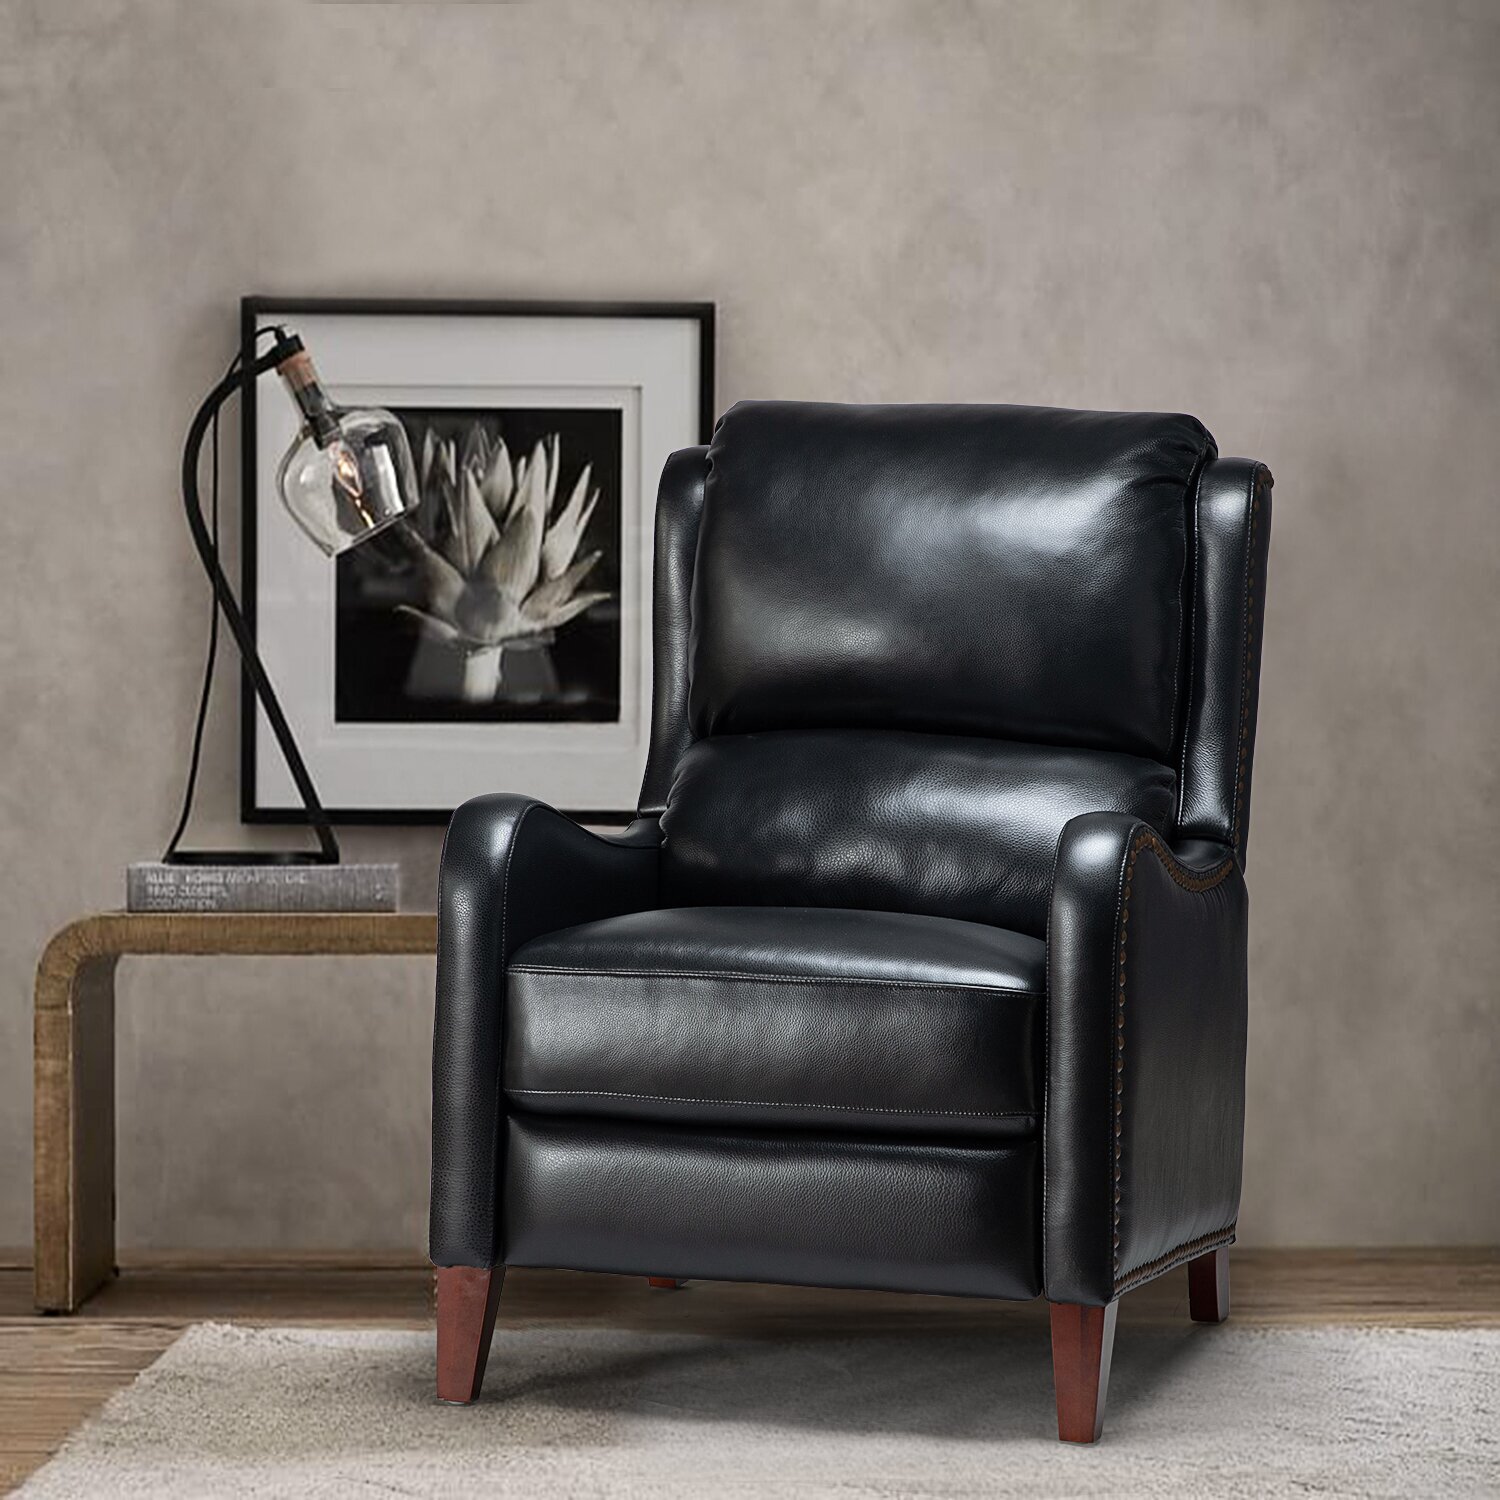 Sleek Leather Wingback Recliner for Small Spaces